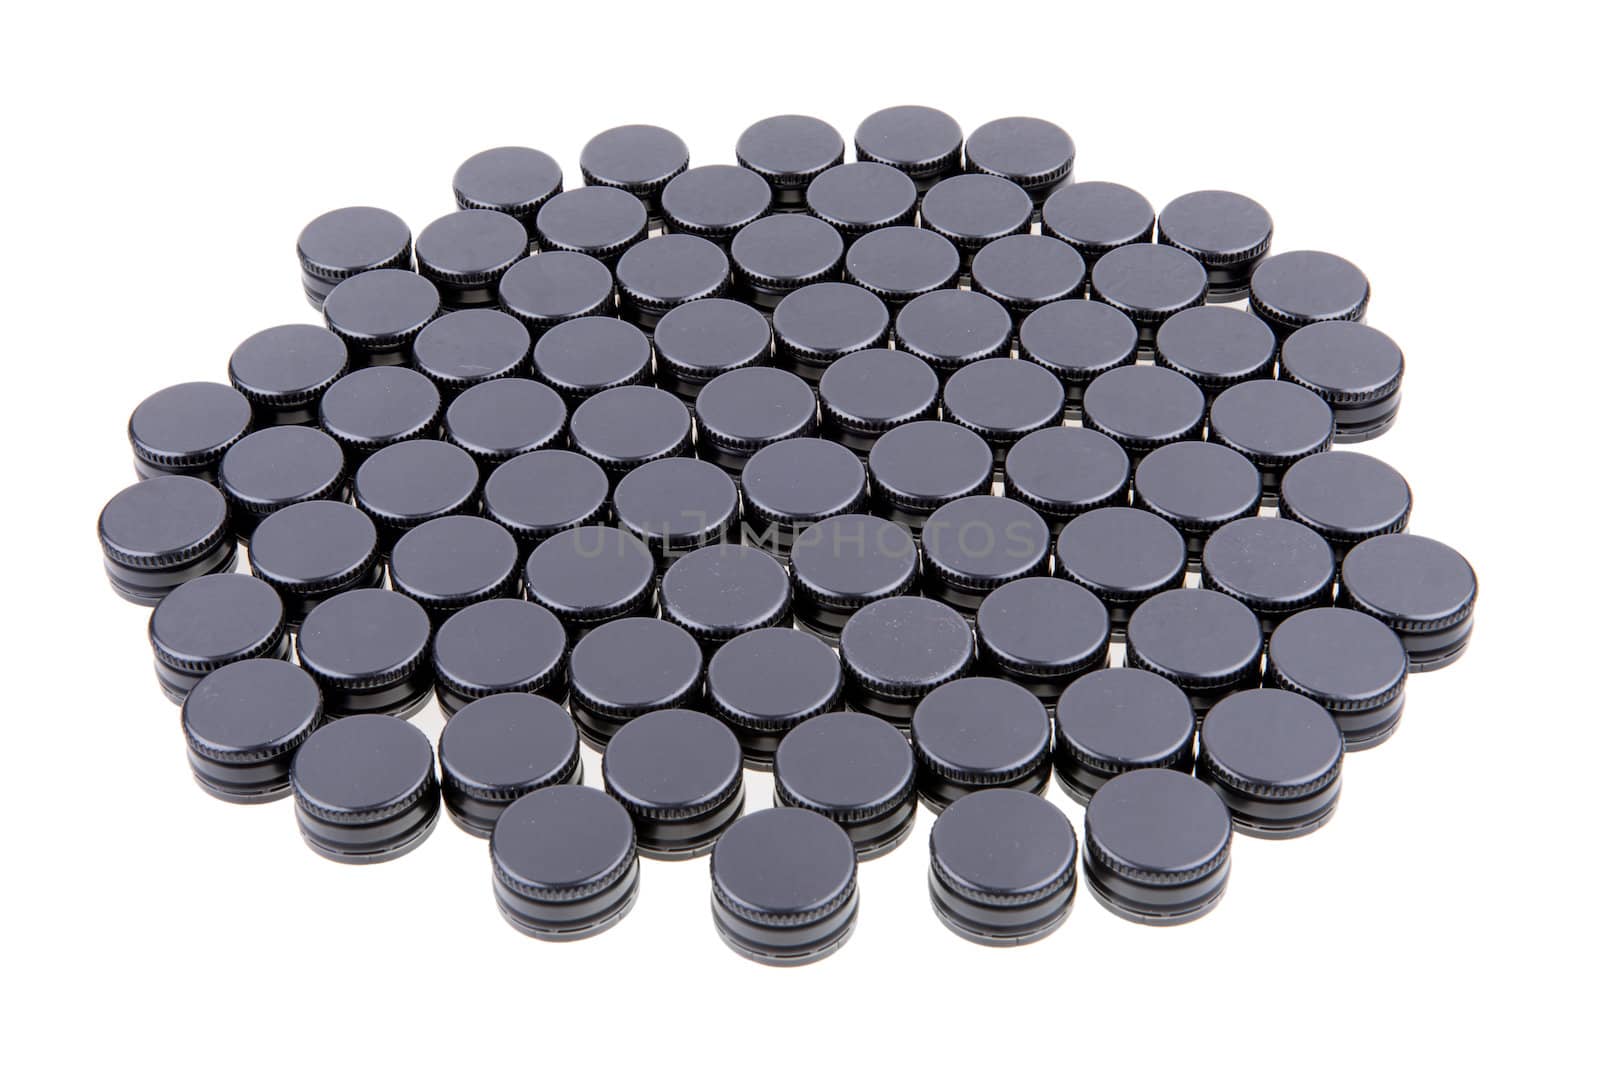 A Pile of Black Metal Screw Caps Isolated On White Background